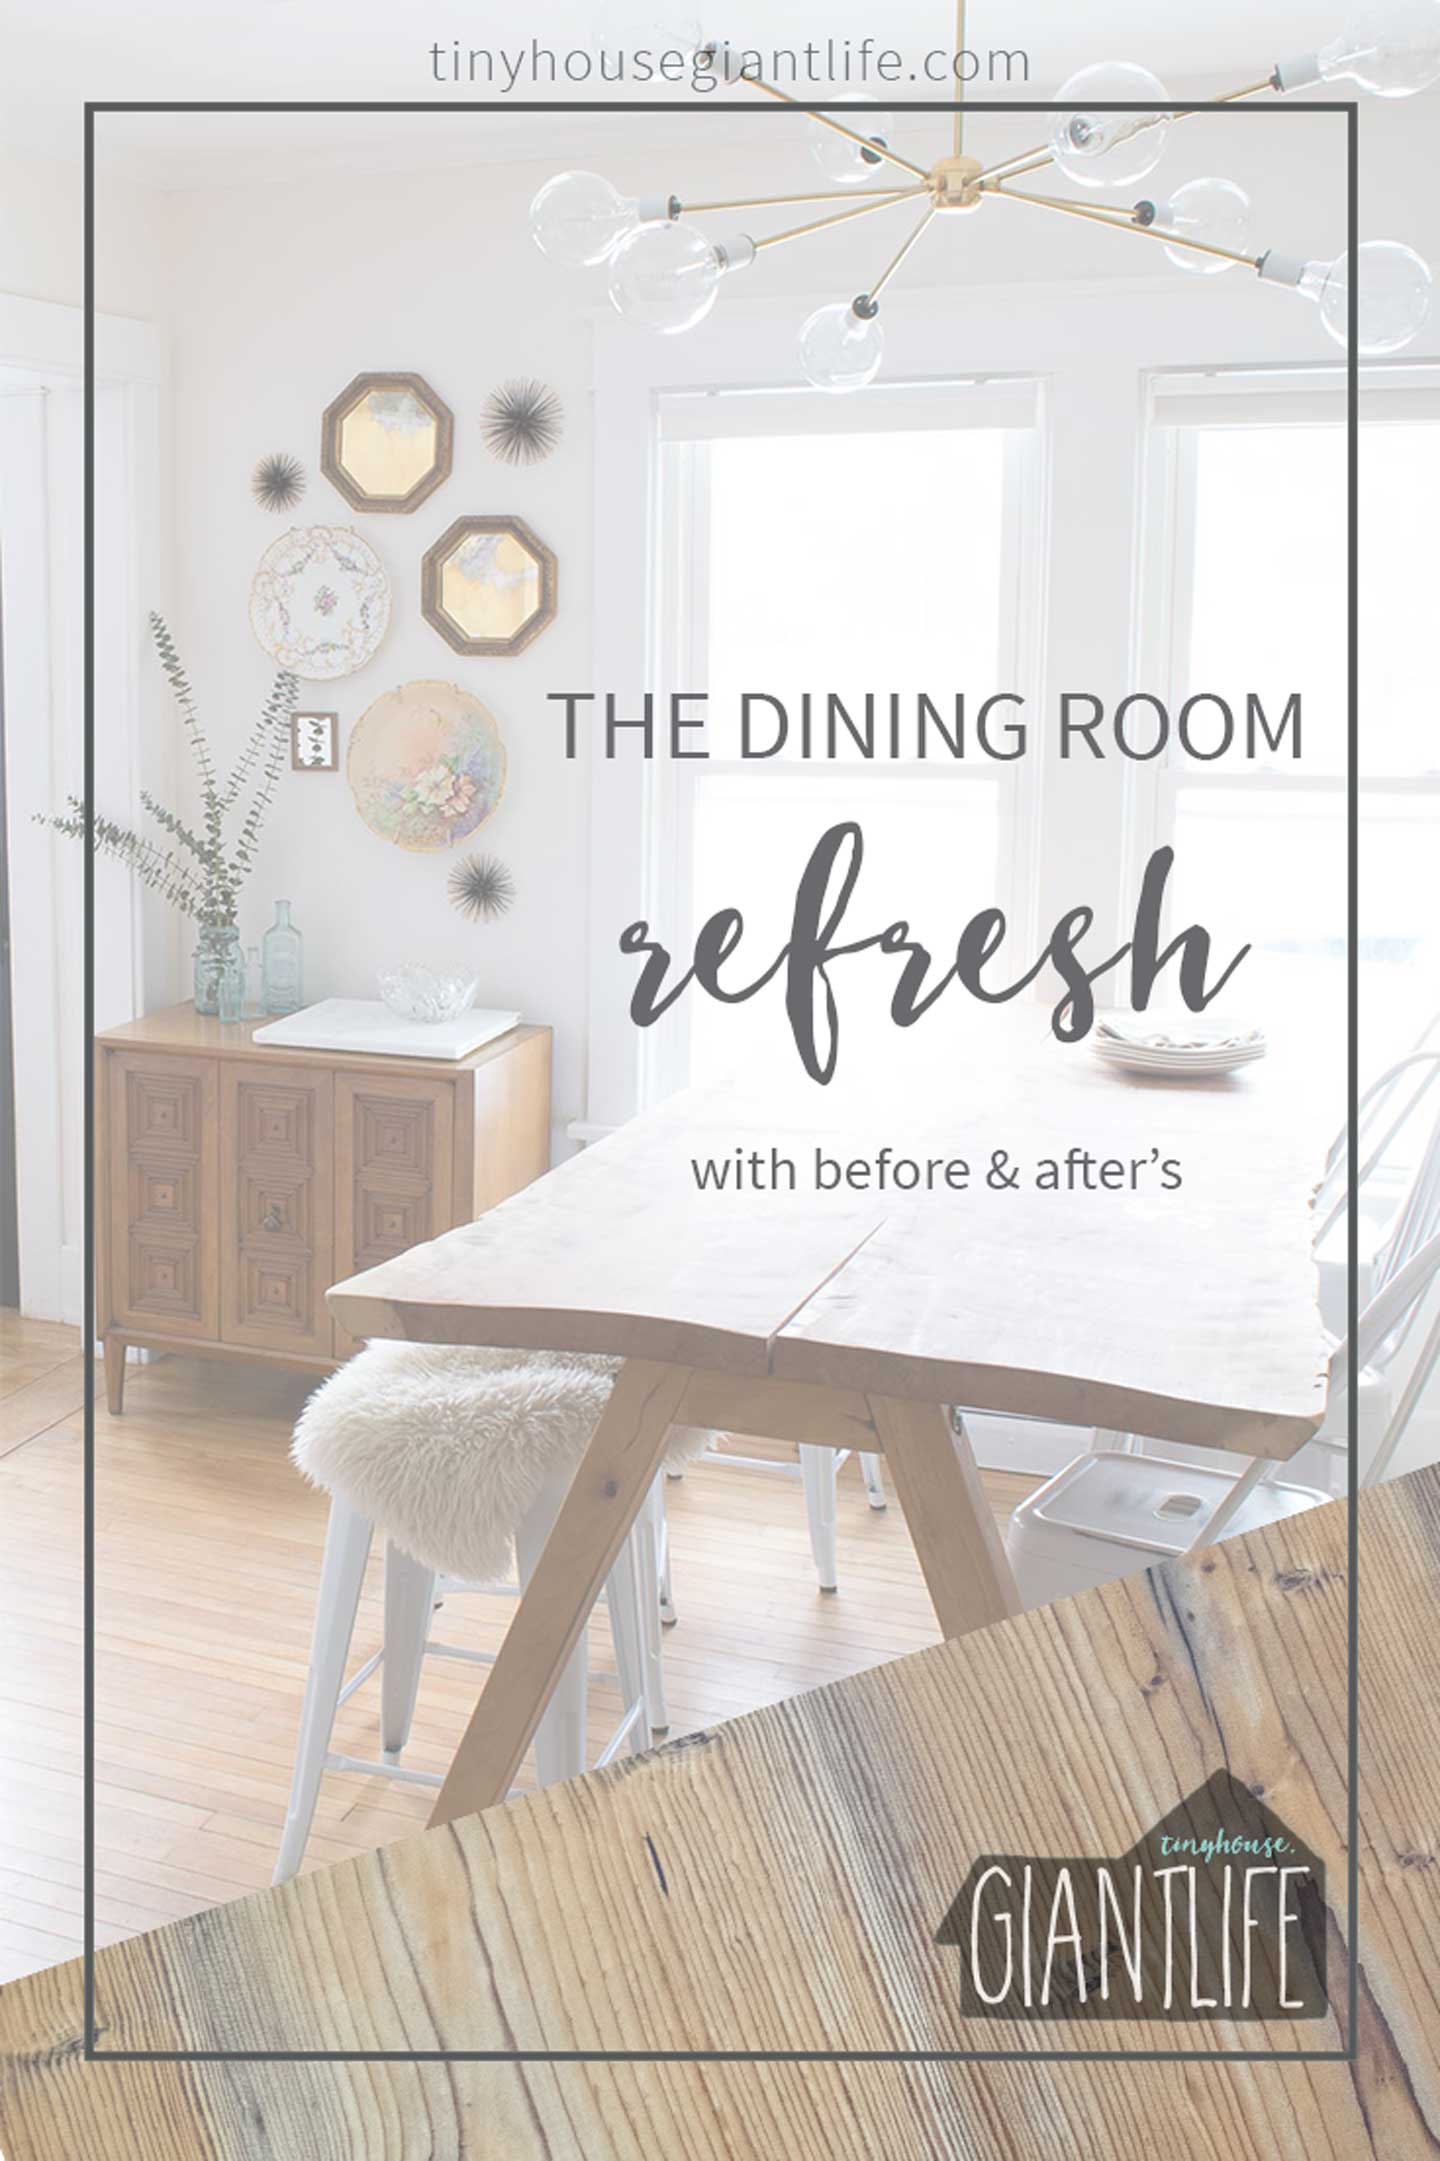 DESIGNING OUR IDEAL DINING ROOM: THE FULL REFRESH